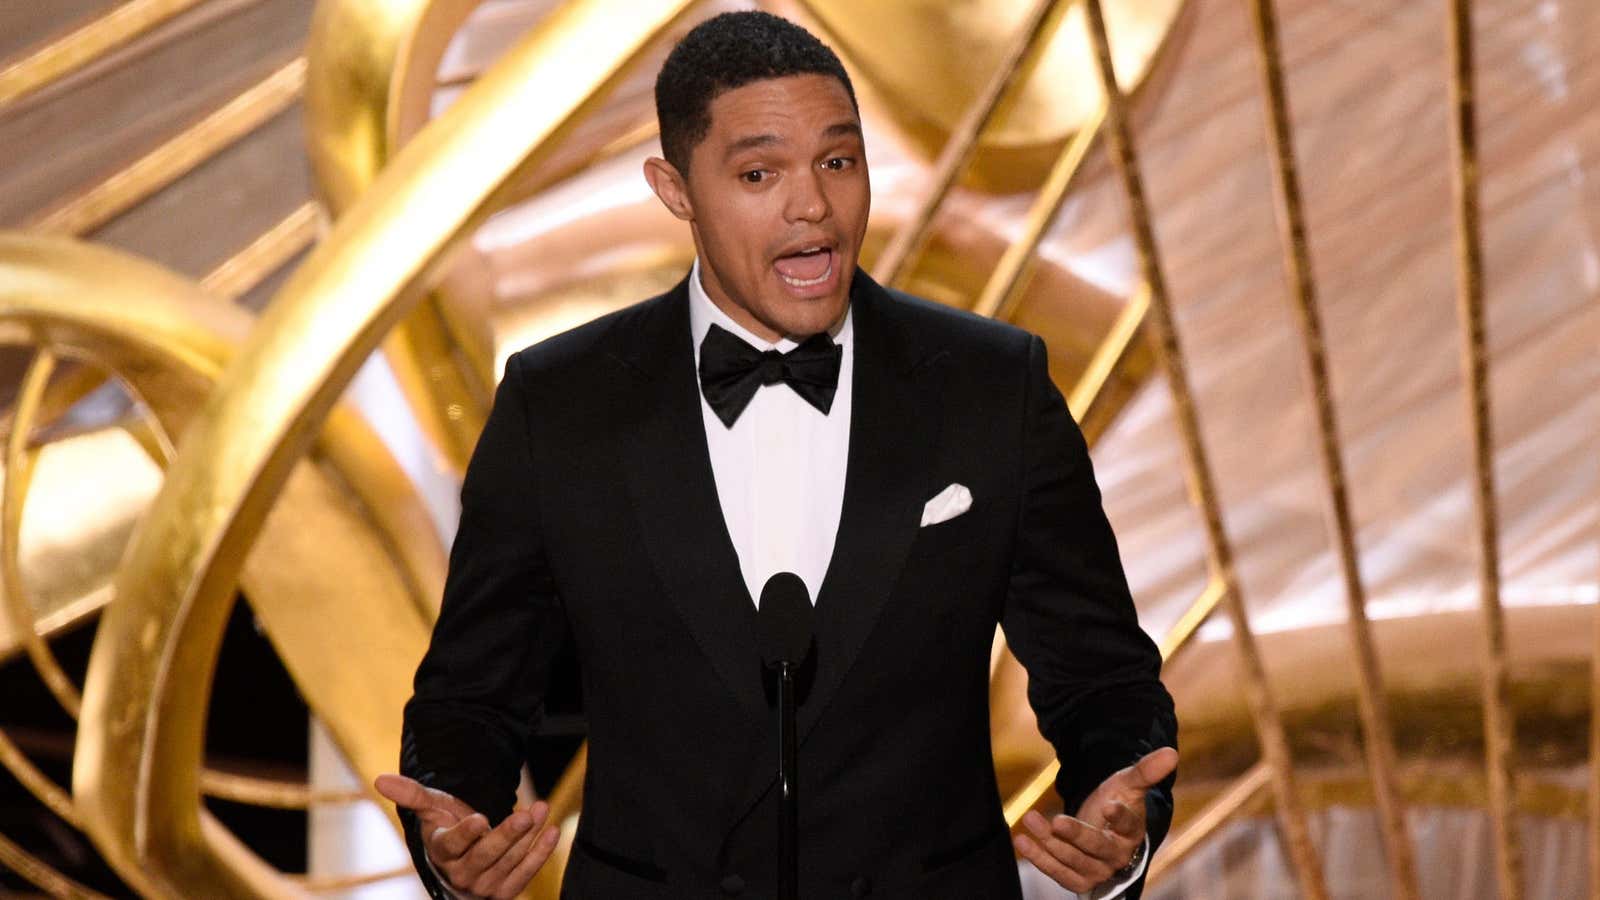 Thanks to Trevor Noah, South Africans got the last laugh at the “Green Book” Oscars